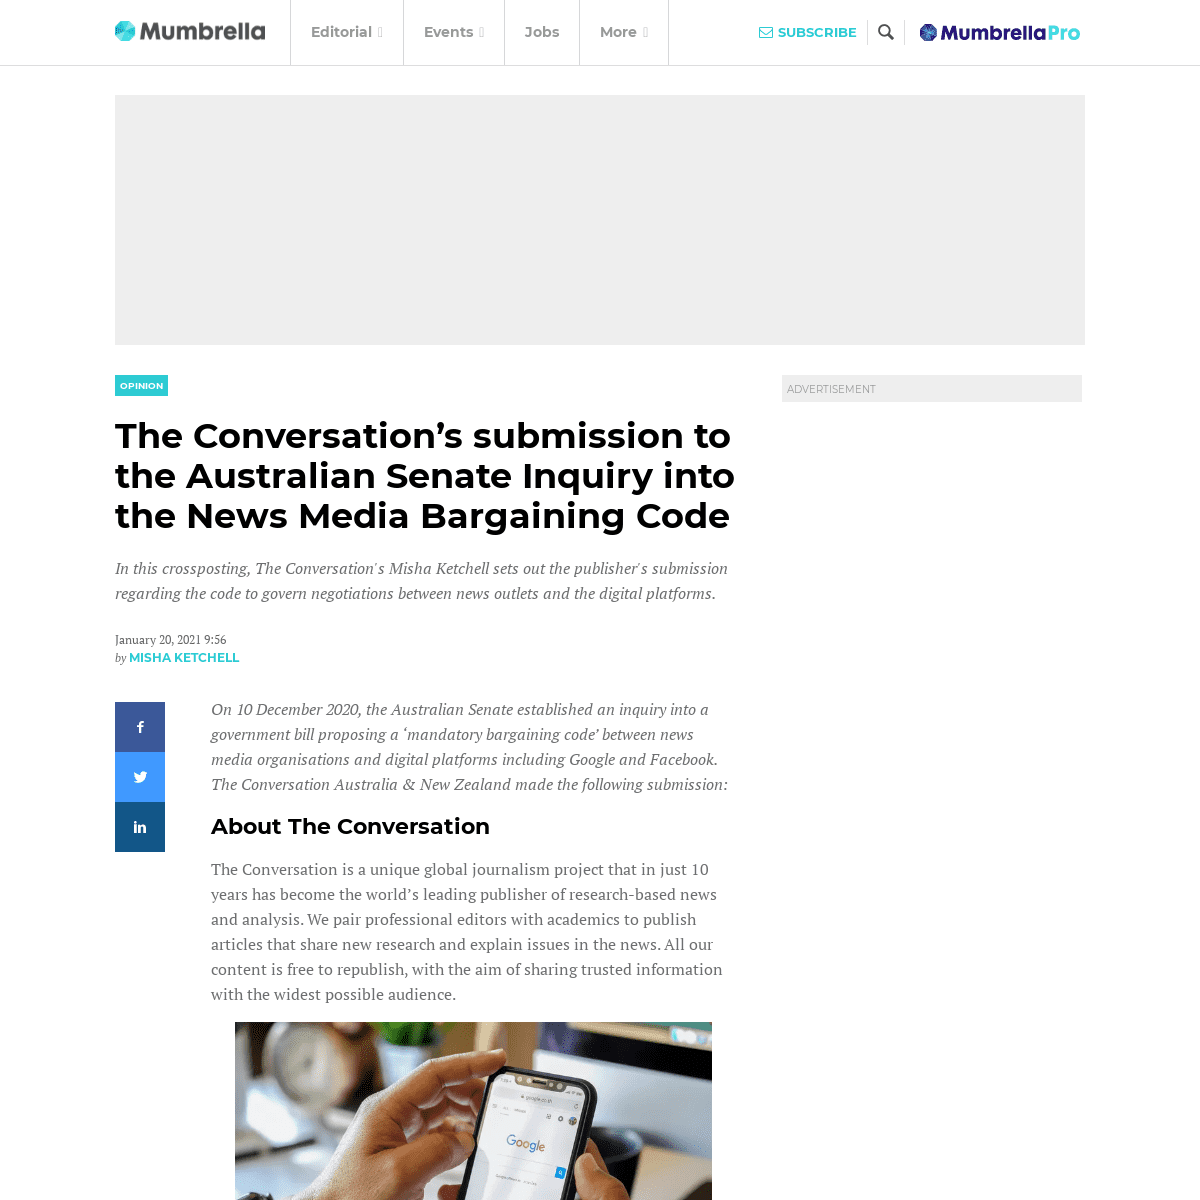 A complete backup of https://mumbrella.com.au/the-conversations-submission-to-the-australian-senate-inquiry-into-the-news-media-